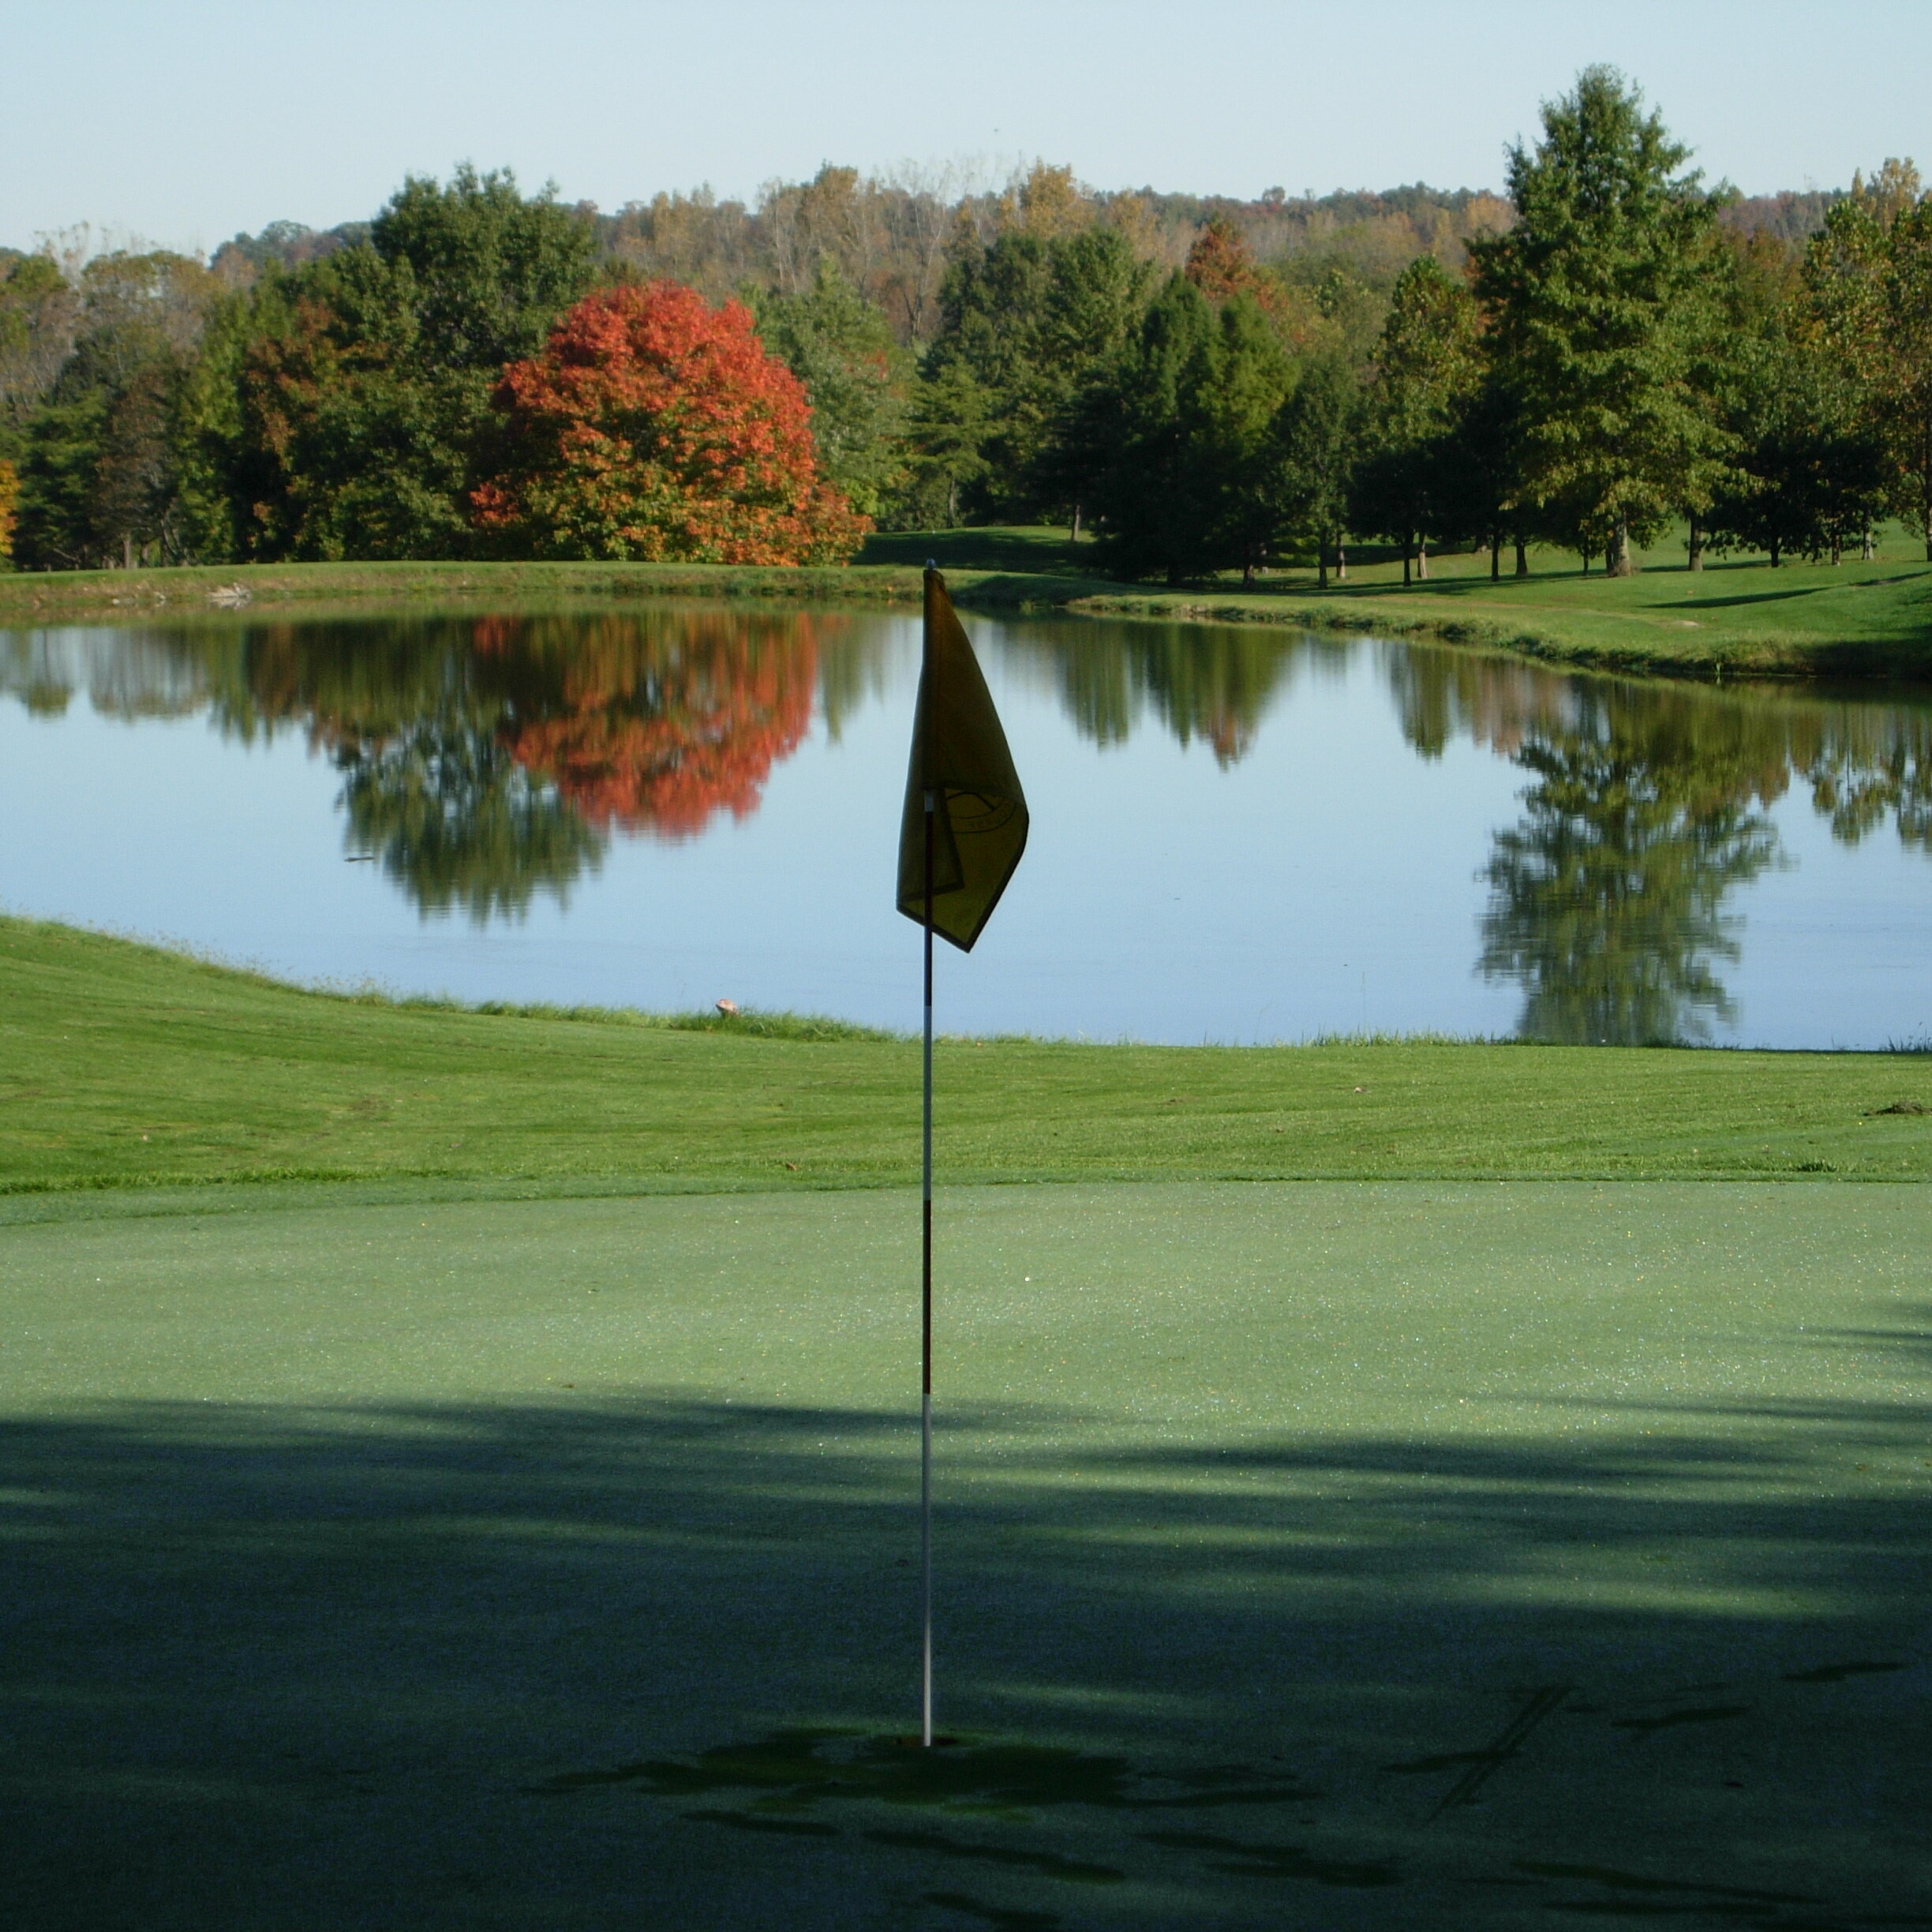 golf grant county, golf upland indiana, golf fairmount indiana, golf marion indiana, outdoor fun grant county indiana